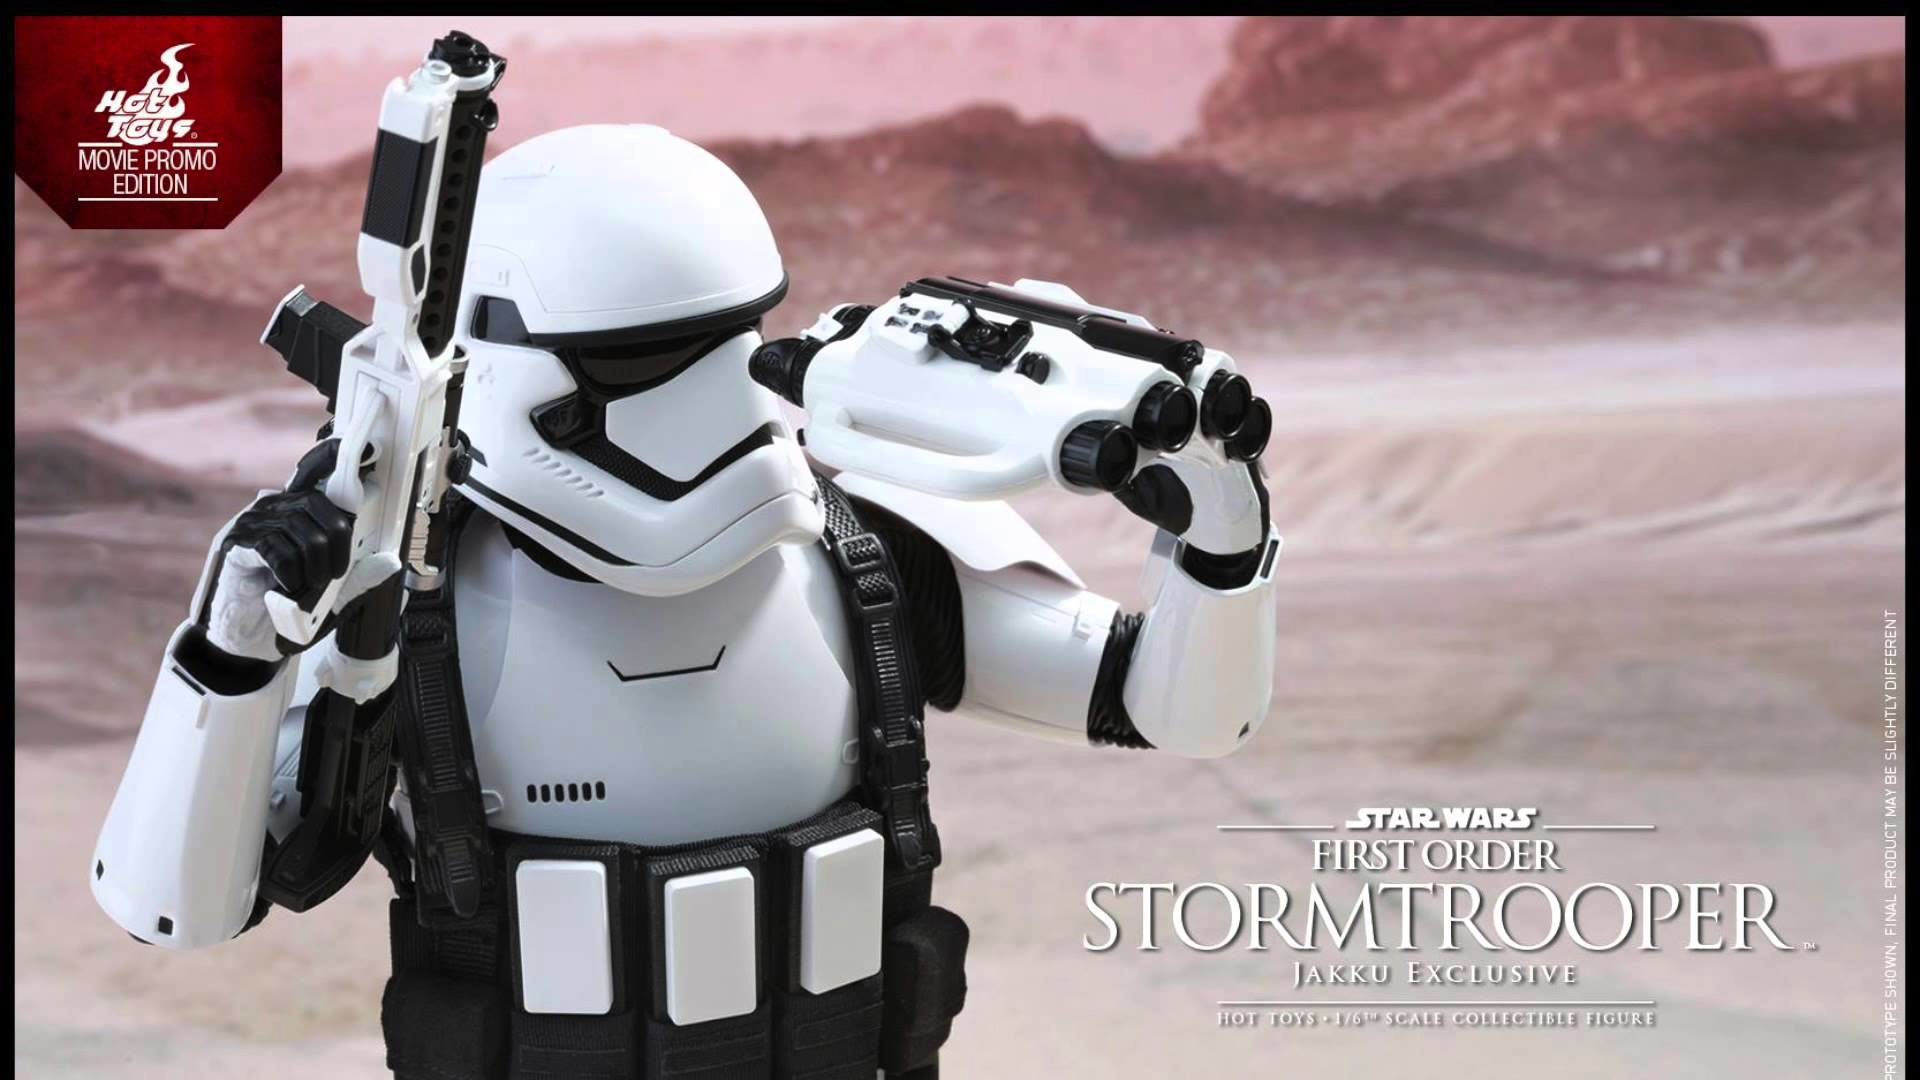 Star Wars The Force Awakens Hot Toys First Order Stormtrooper Jakku Exclusive 1 / 6 Scale Figure